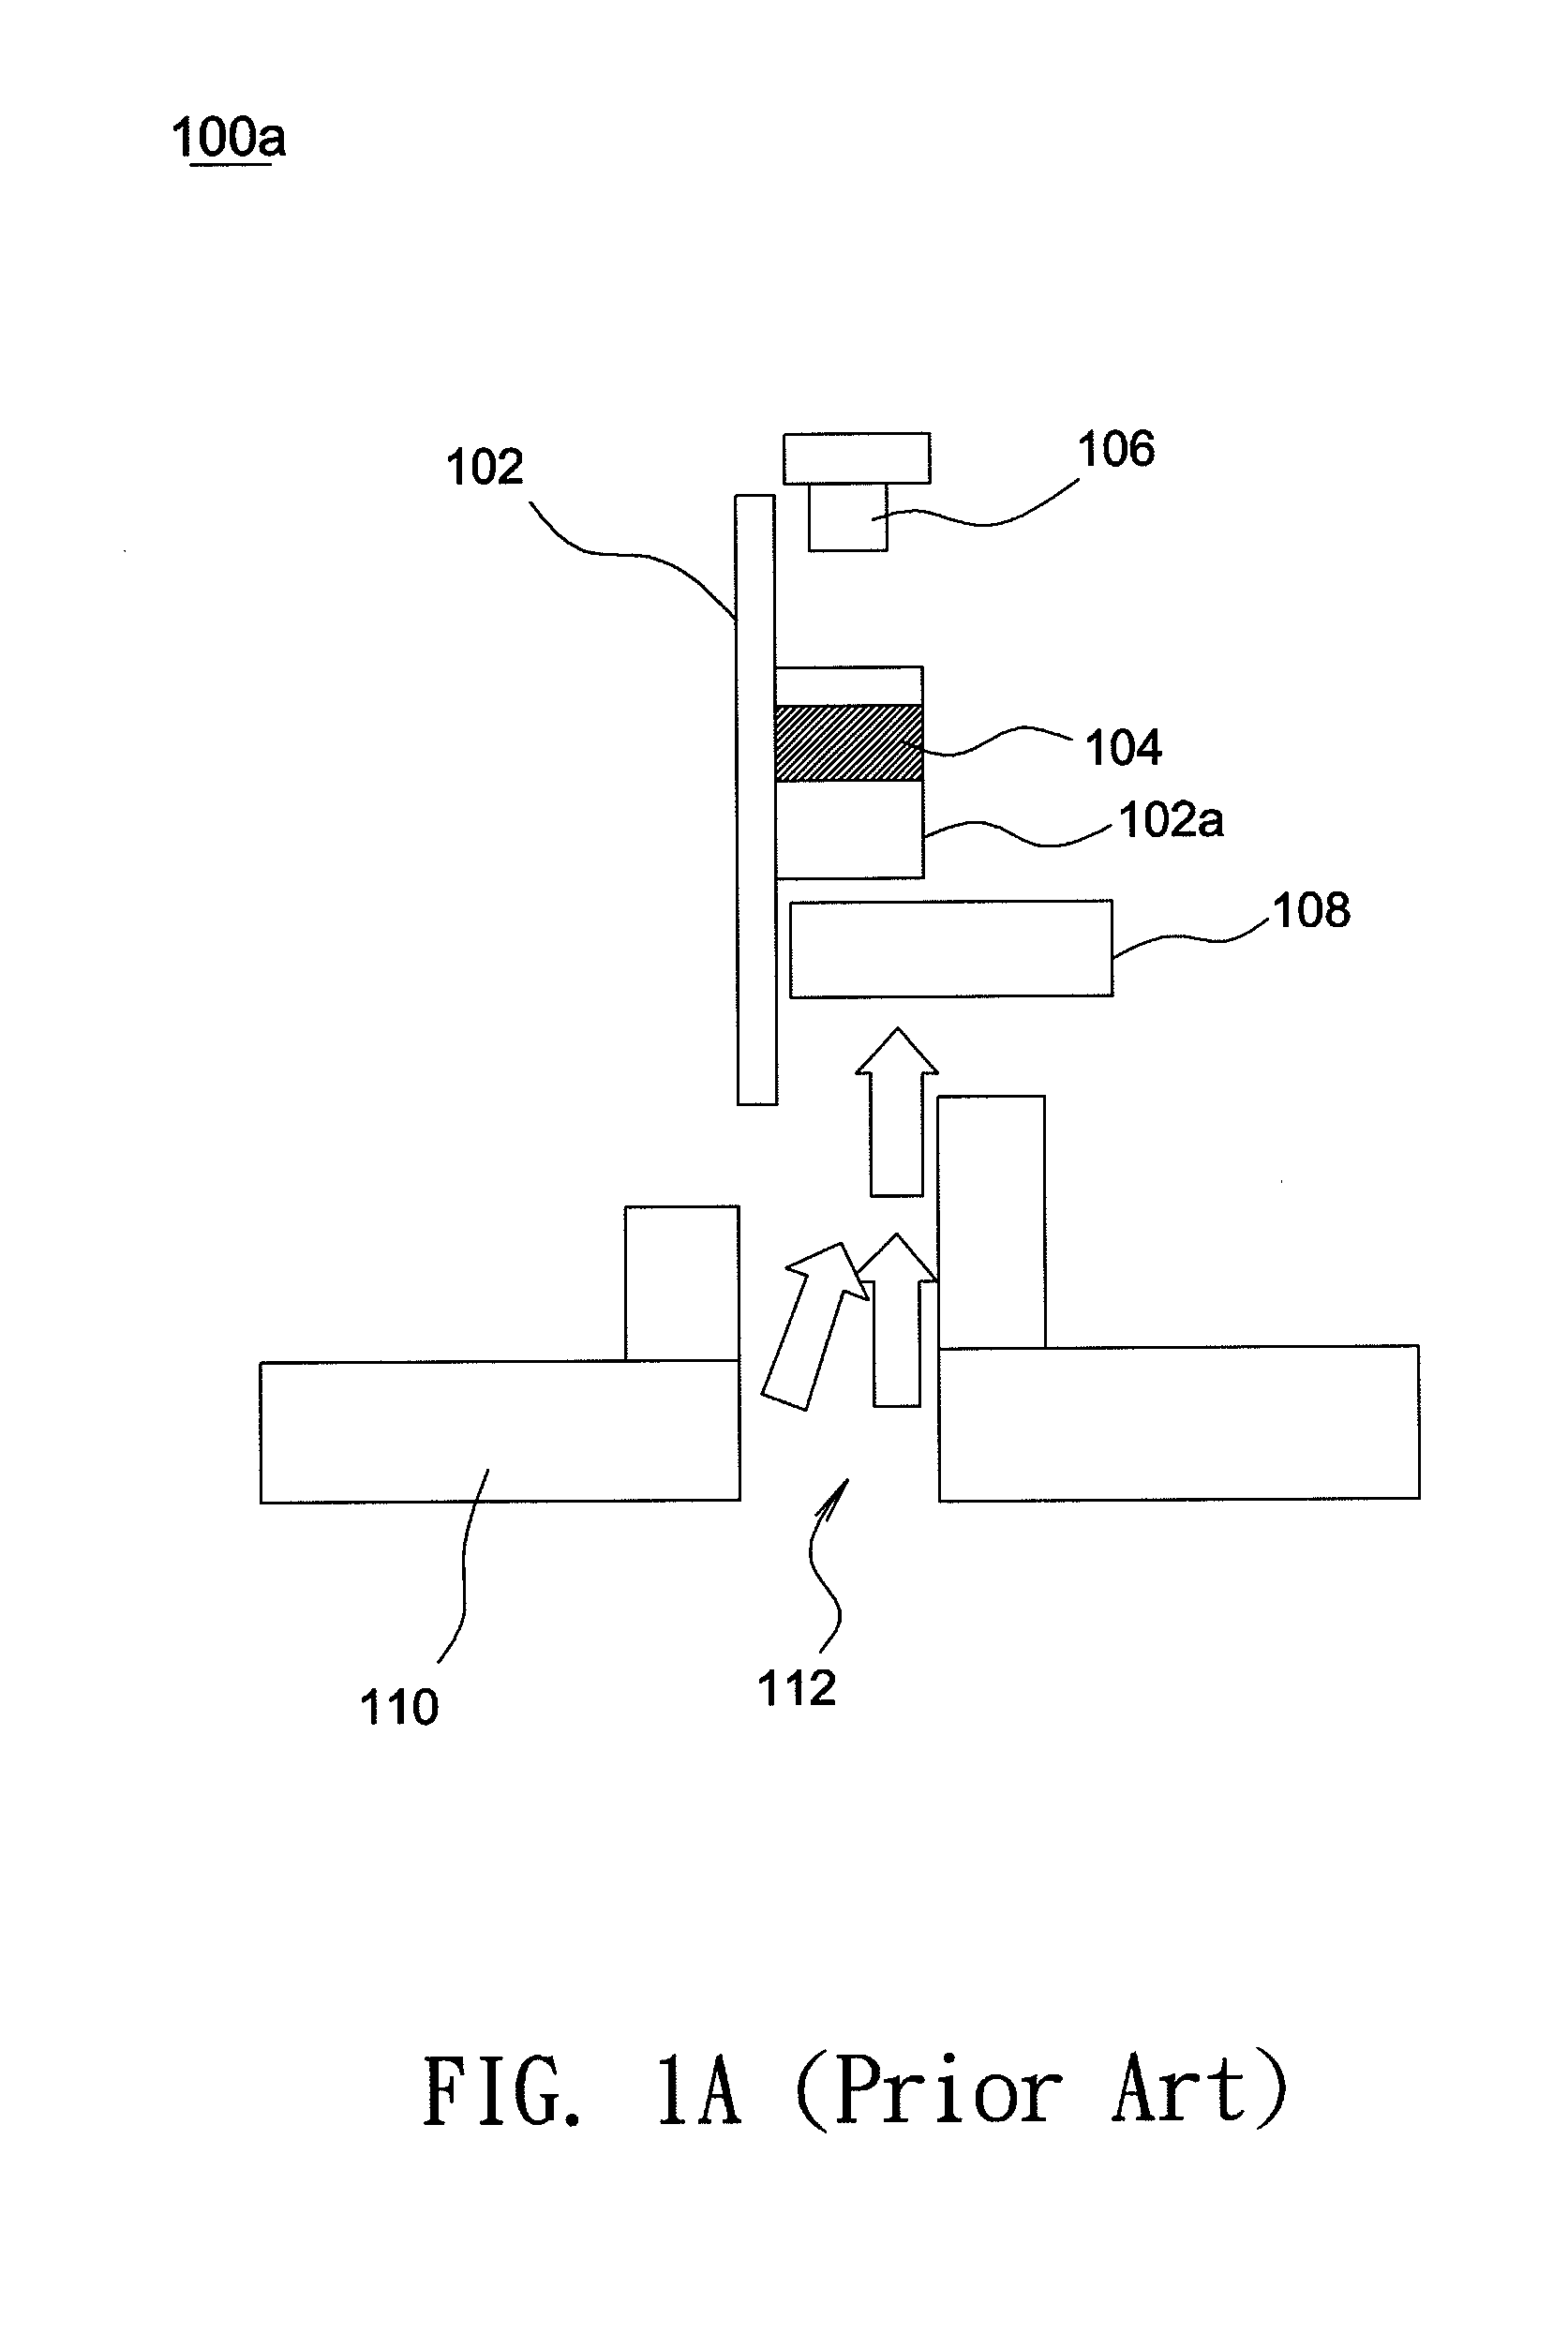 Heat dissipation module for optical projection system